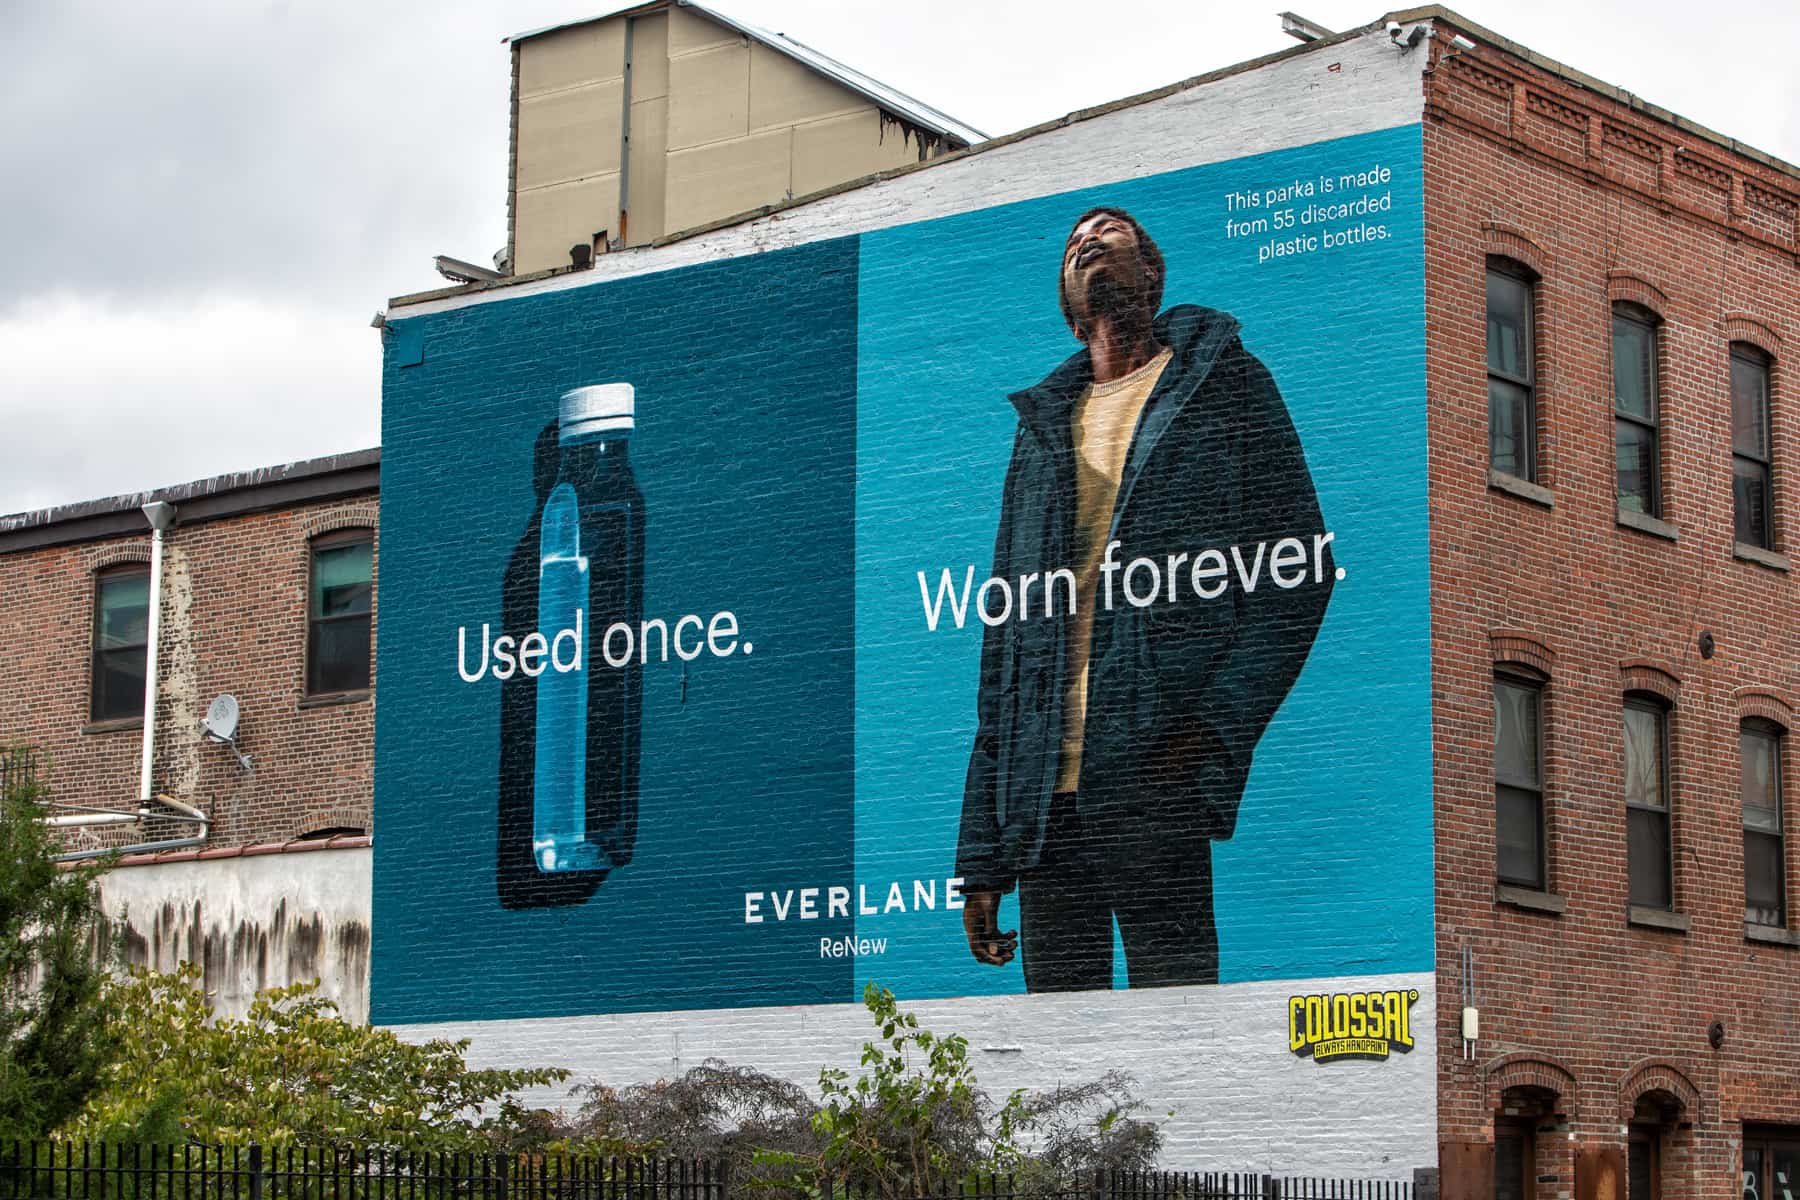 An ad for Everlane highlighting the environmental impact of using recycled plastic in their clothing <span class="figure--credit">Photo by [Kasia Bedkowski](https://www.kasiabedkowski.com/work/renew)</span>